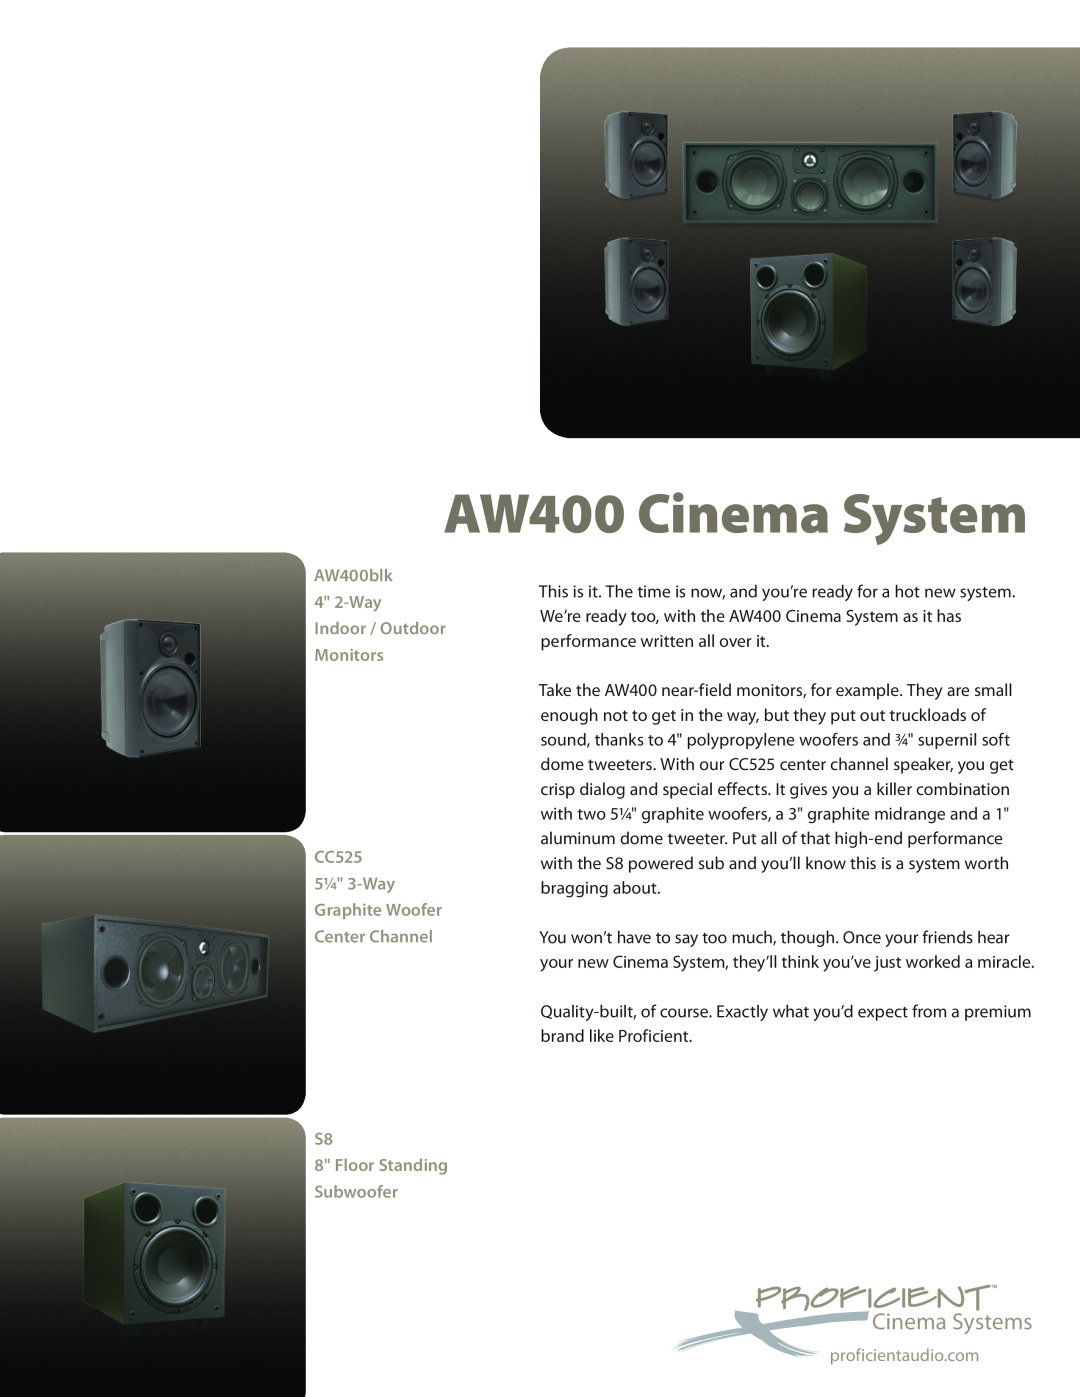 Proficient Audio Systems manual AW400 Cinema System, Cinema Systems, AW400blk 4 2-Way Indoor / Outdoor Monitors 